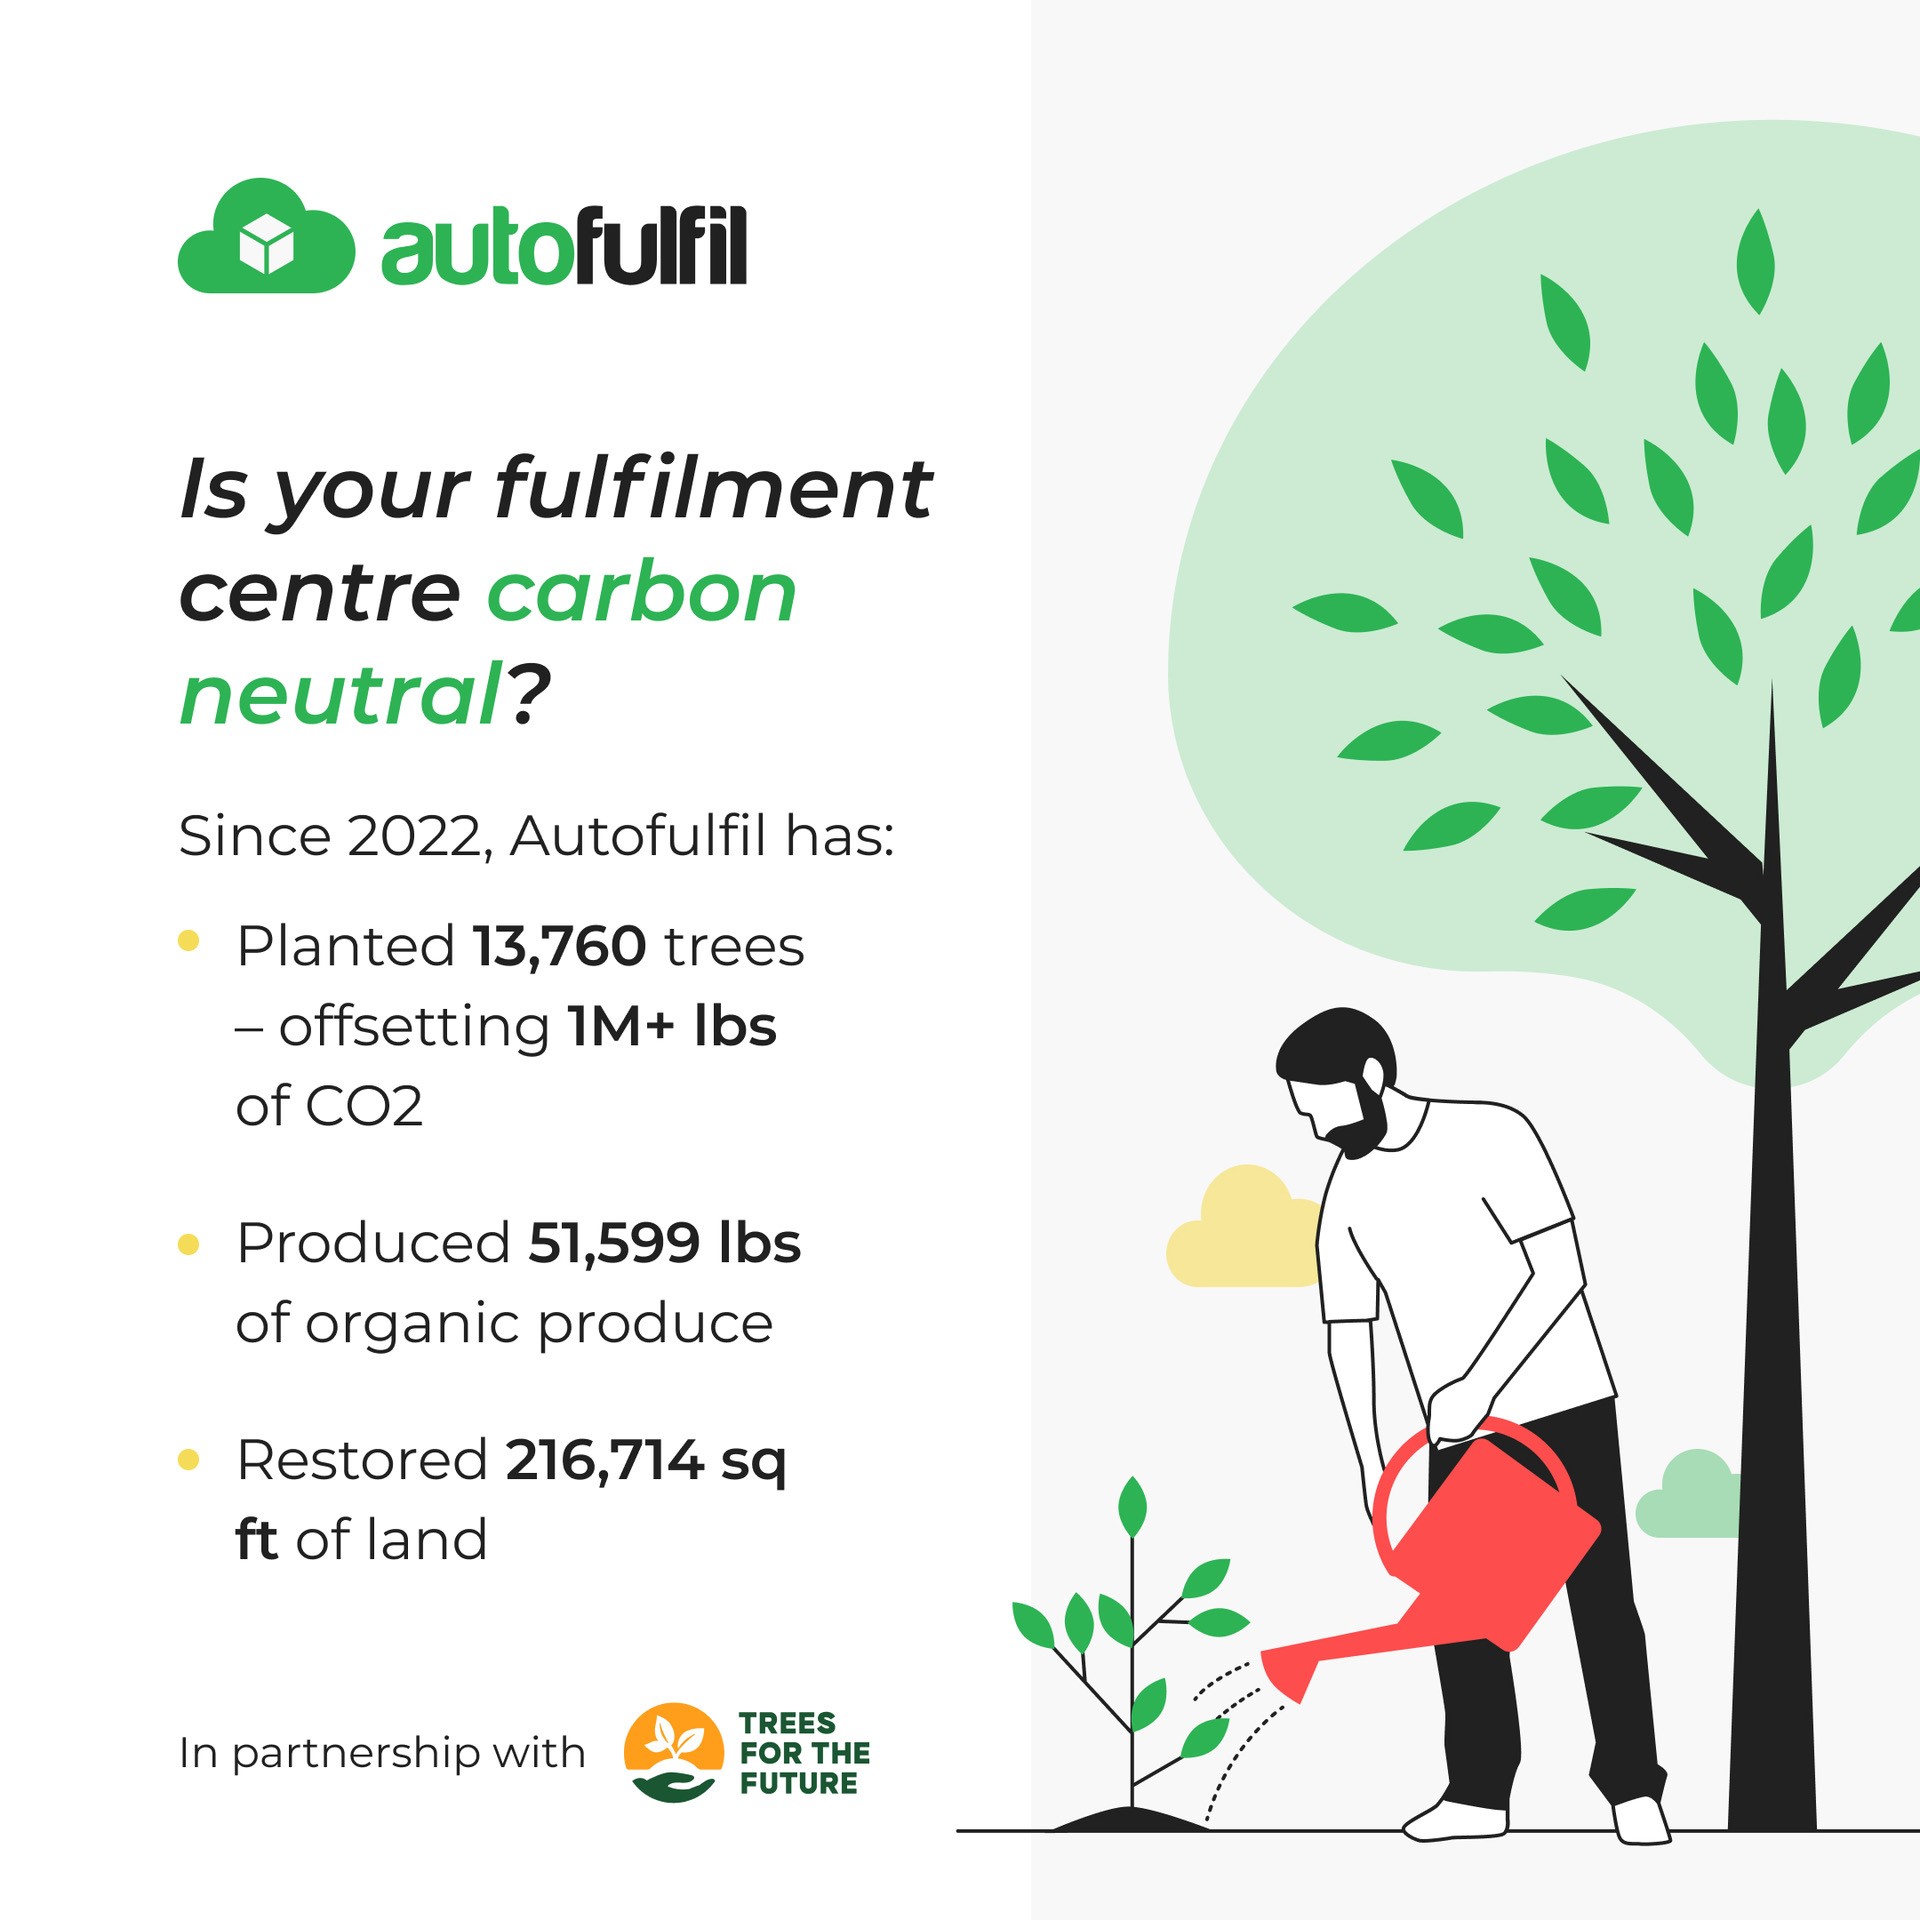 Is your fulfilment centre carbon neutral? Since 2022, Autofulfil has: Planted 13,760 trees – offsetting 1M+ lbs of CO2 Produced 51,599 lbs of organic produce Restored 216,714 sq ft of land In partnership with Trees for the Future